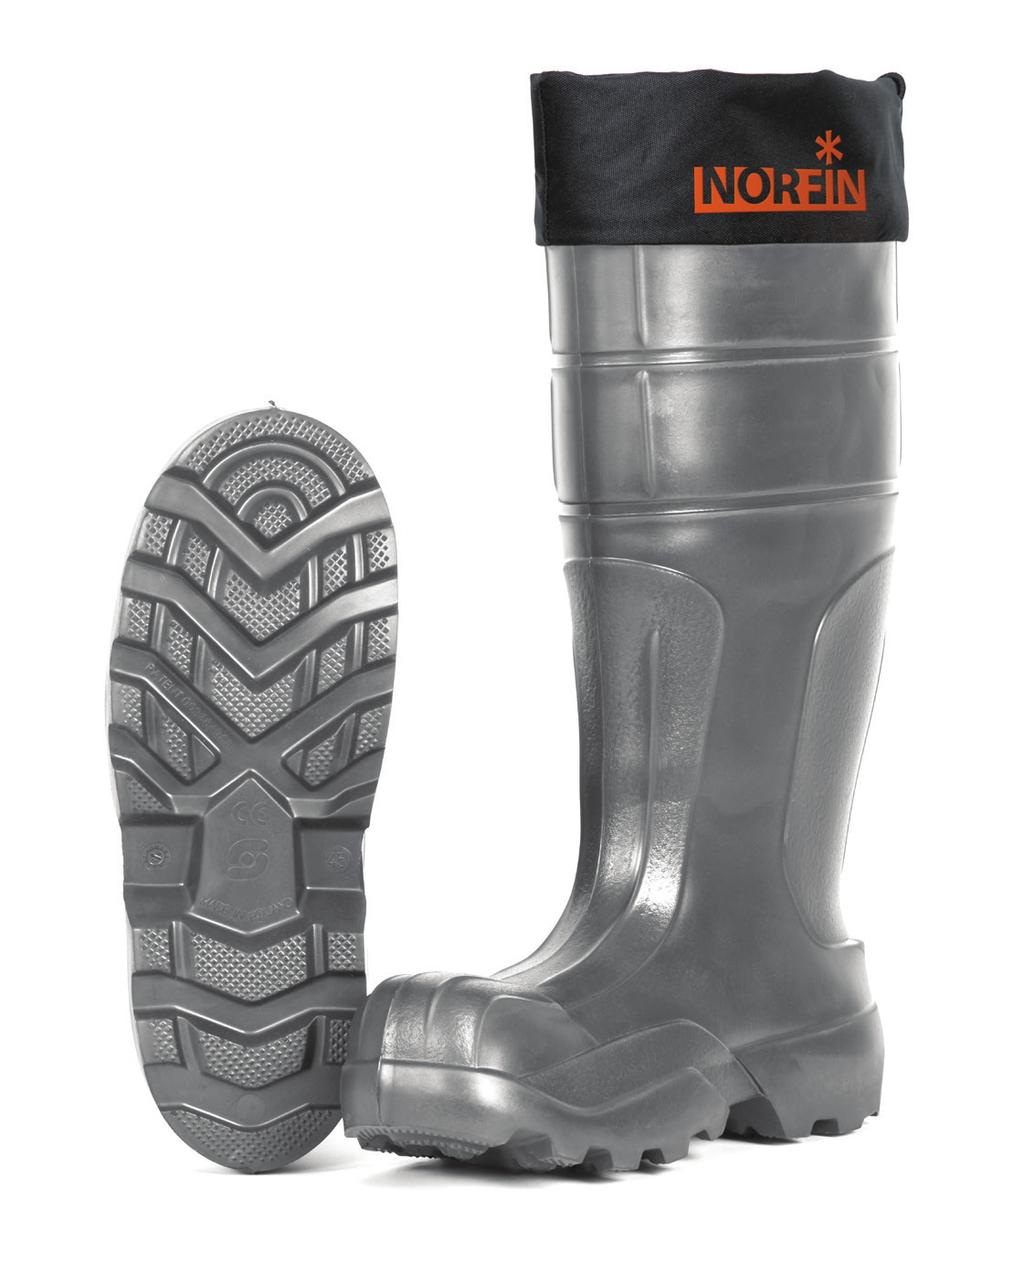 34 ULTIMATE PROTECTION Glacier WINTER BOOTS NORFIN GLACIER boots made of EVA material with removable insole ensure continuous thermal protection at temperatures as low as 50 C.